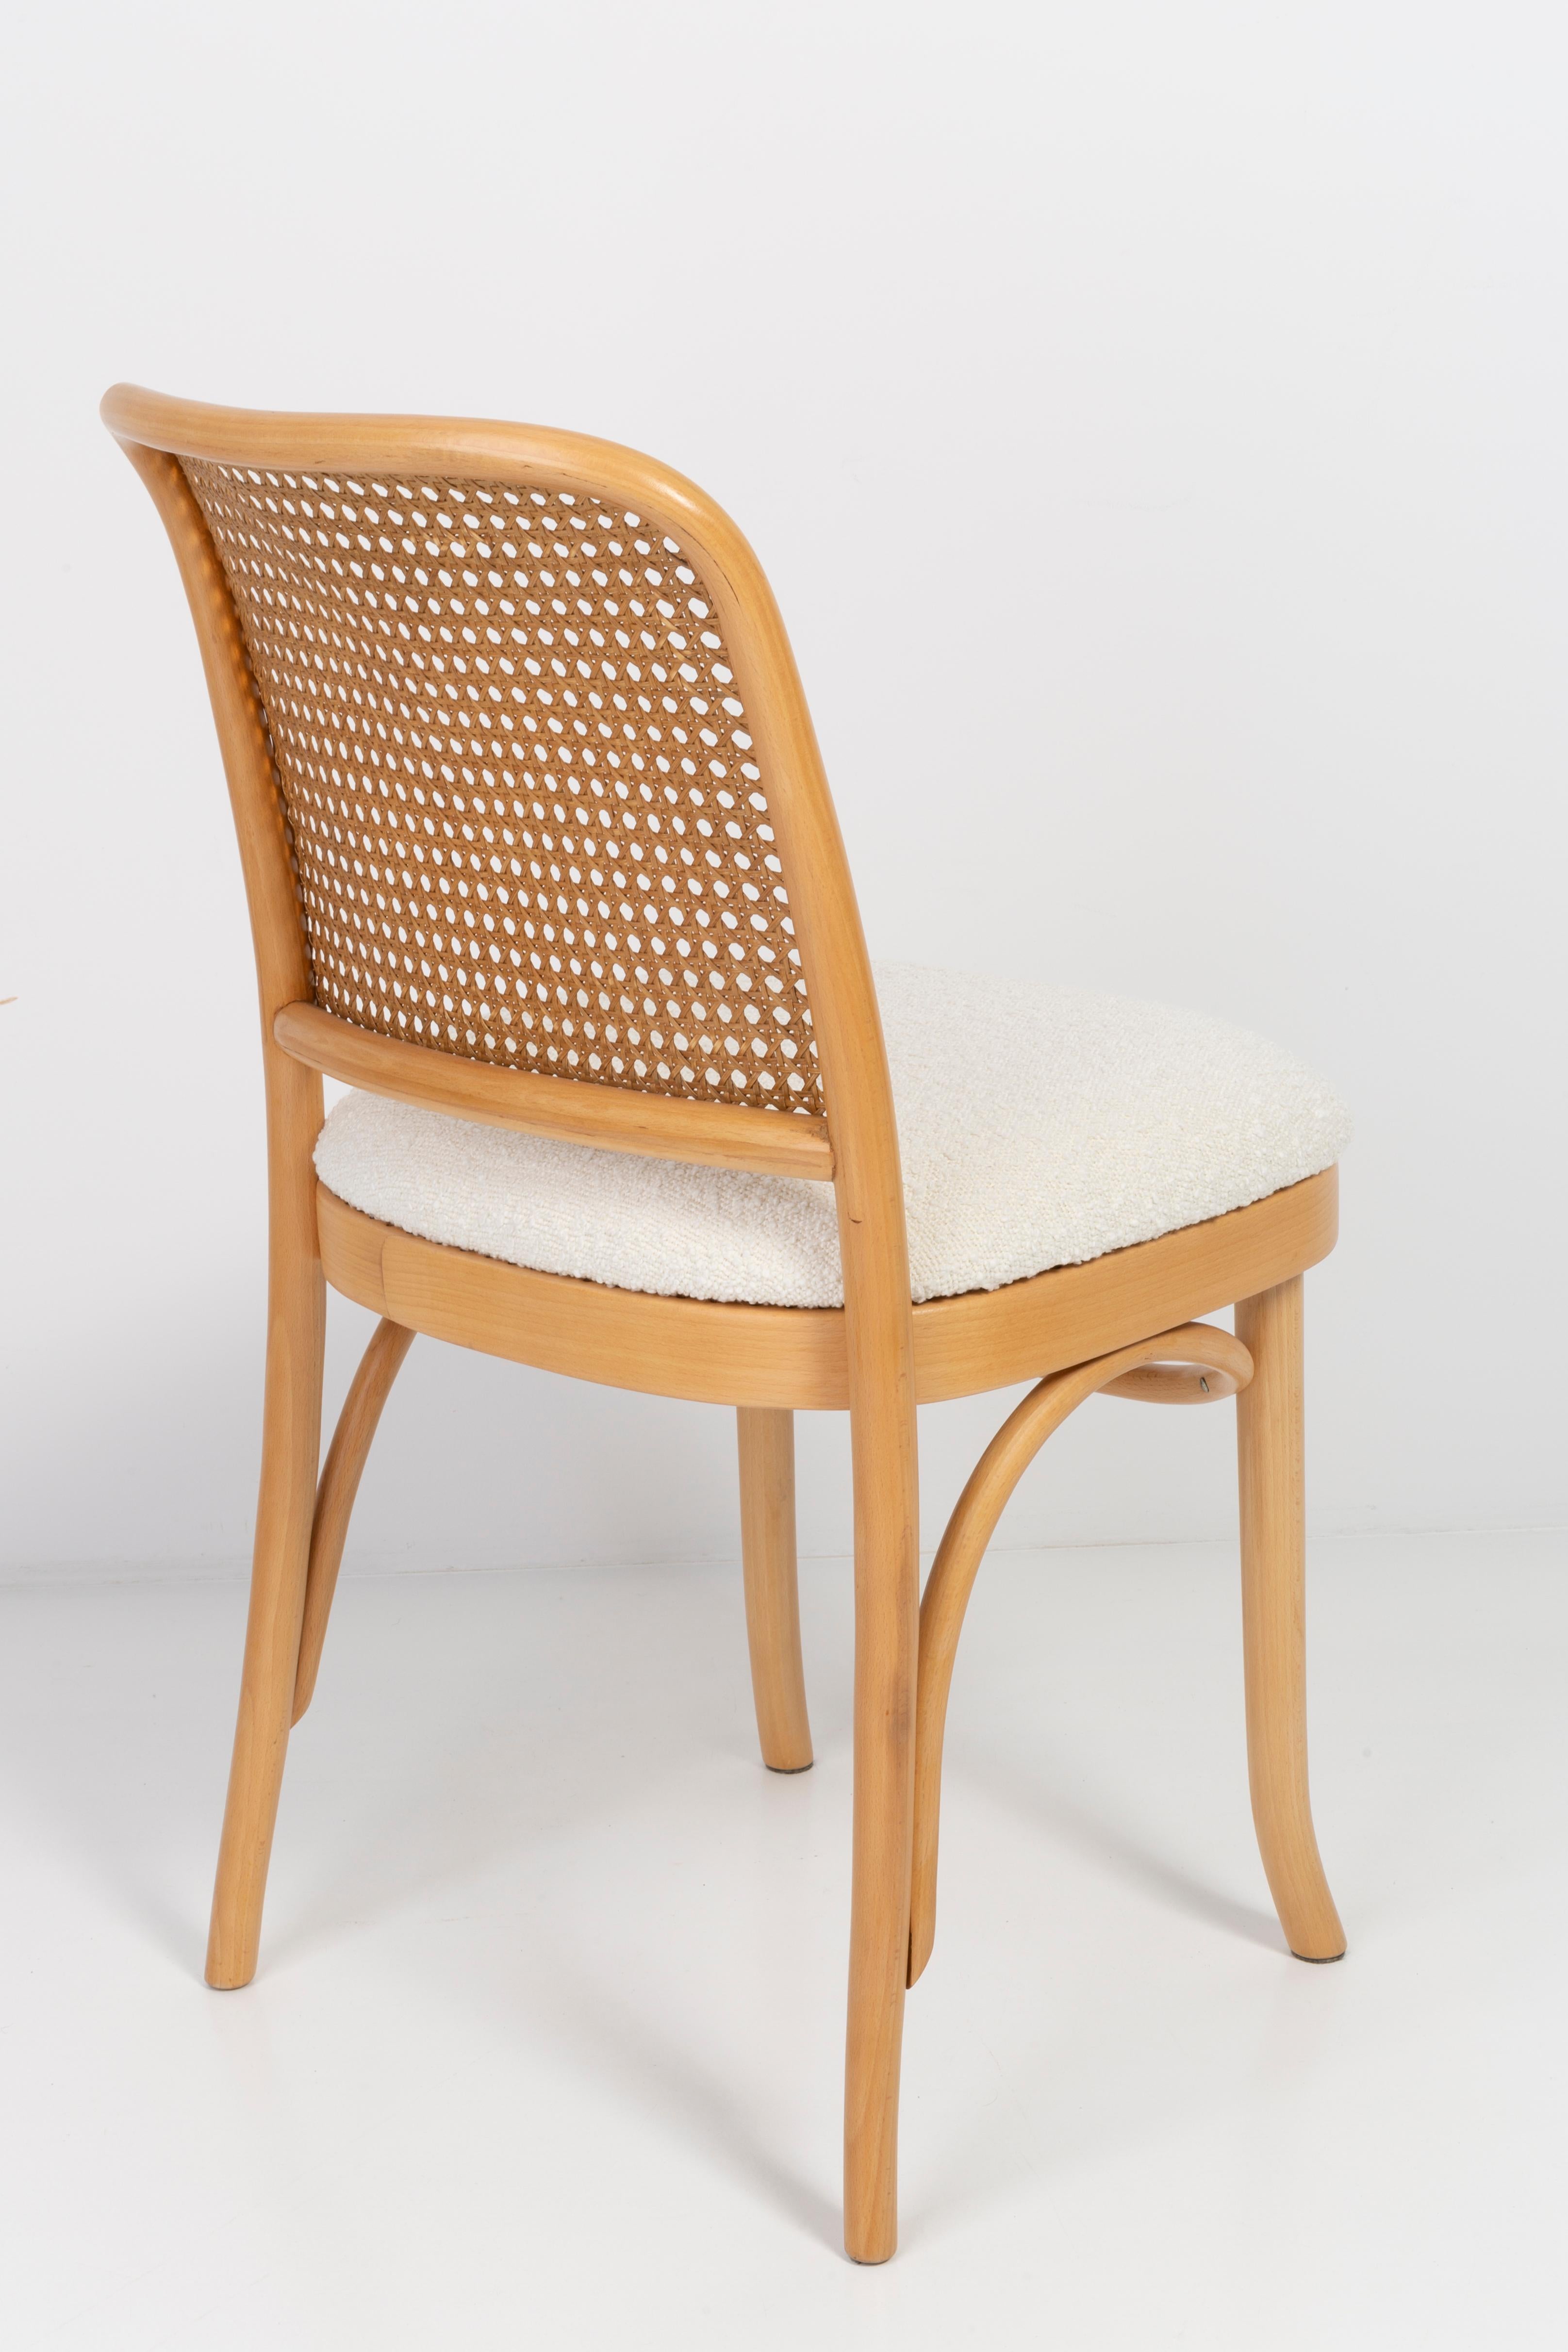 Set of Eight White Boucle Thonet Wood Rattan Chairs, 1960s For Sale 6